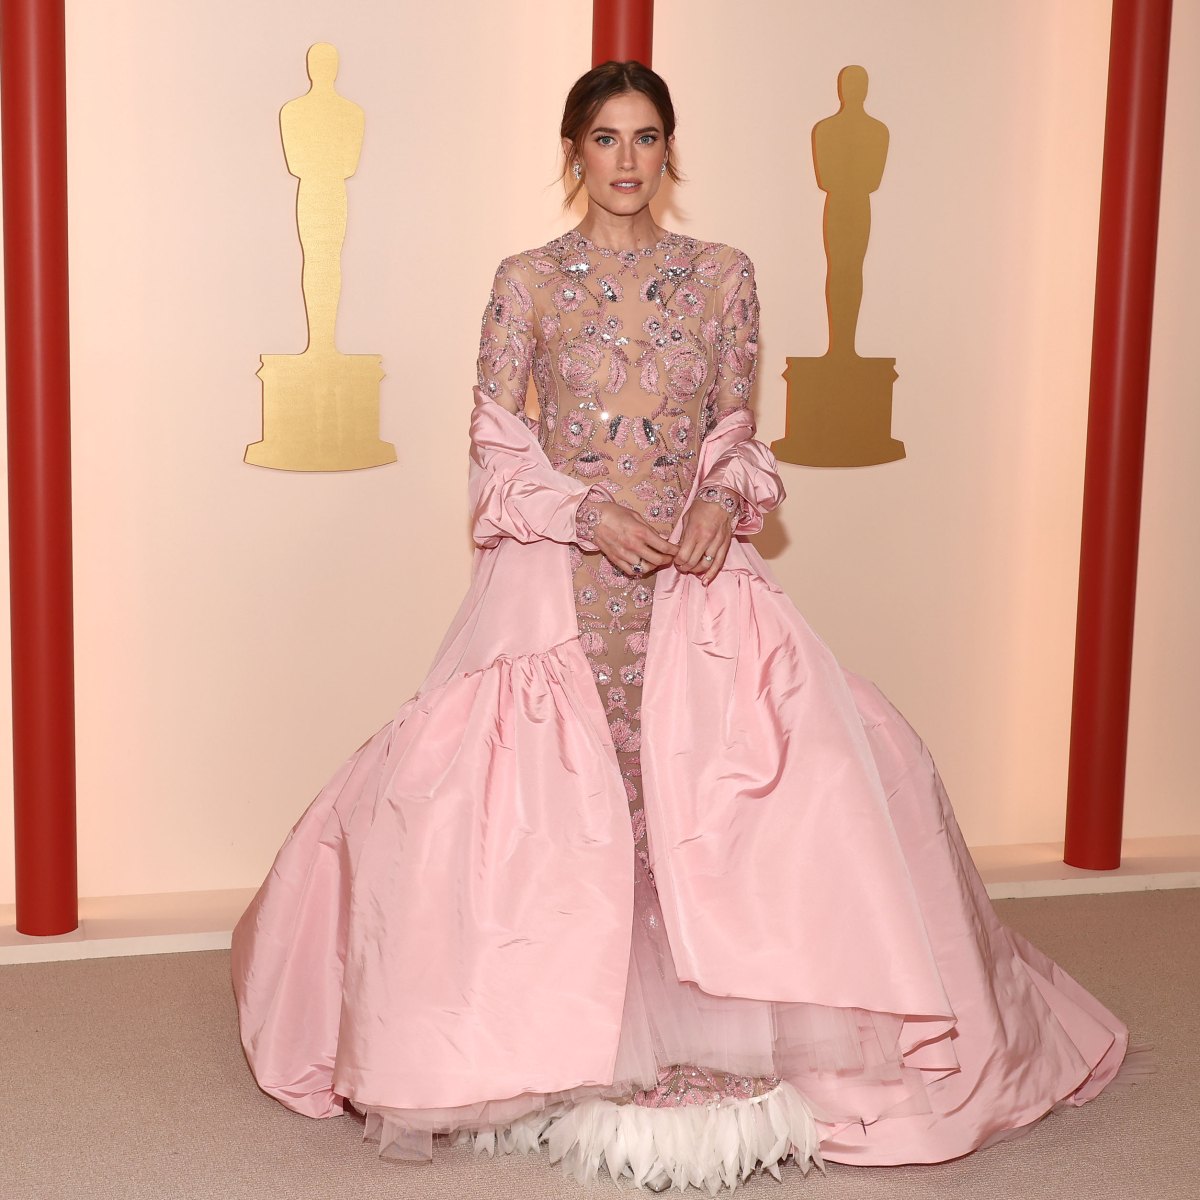 Oscars red carpet: Best dressed at 2023 Academy Awards - Los